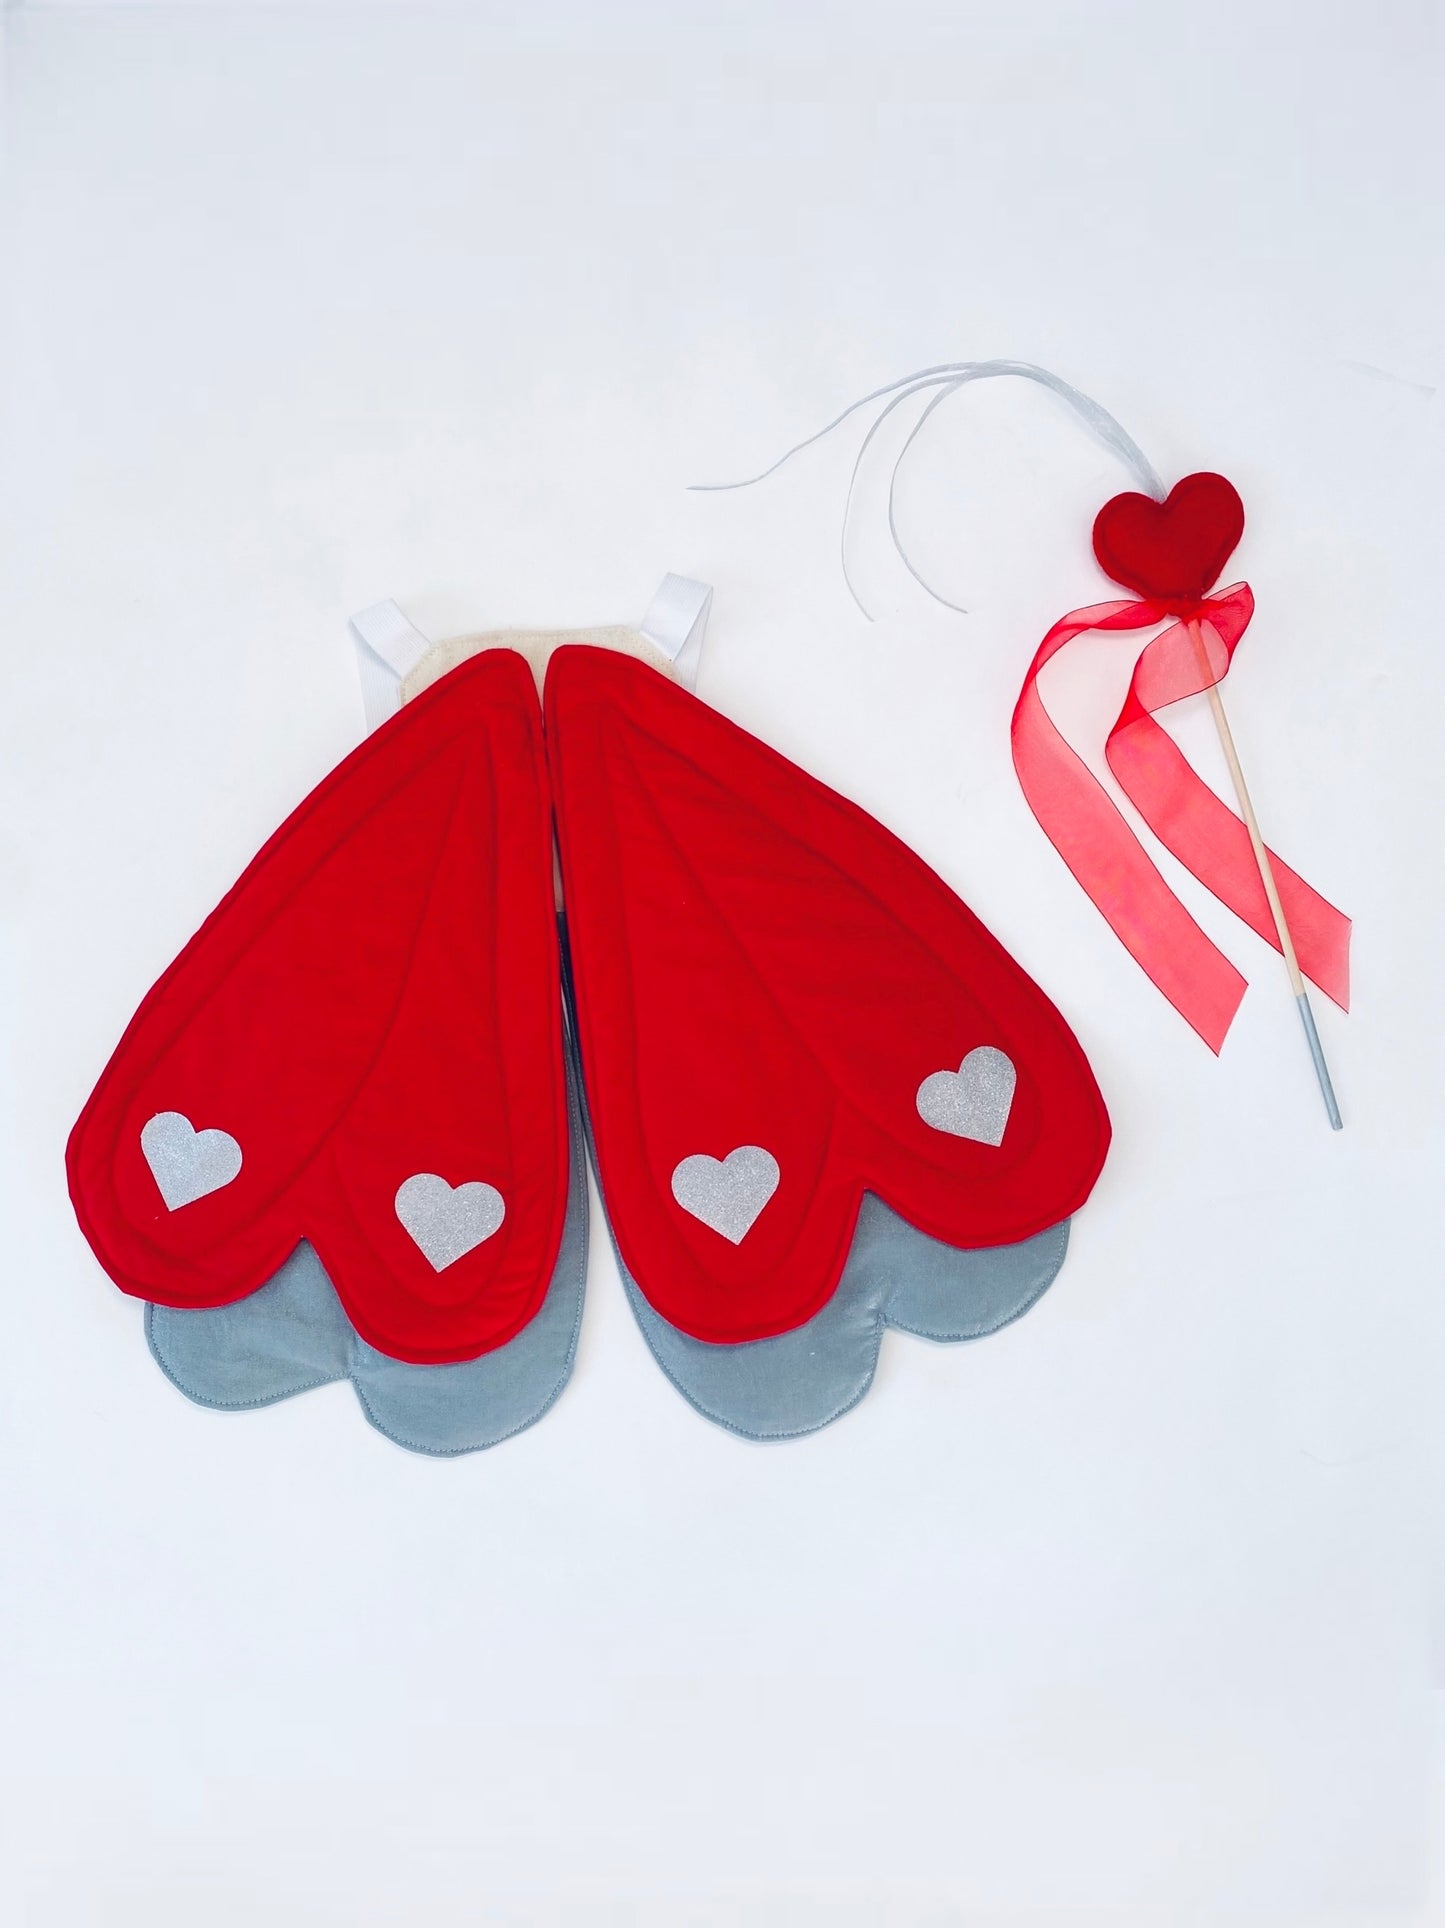 Cupid wings heart costume for kids and toddlers.